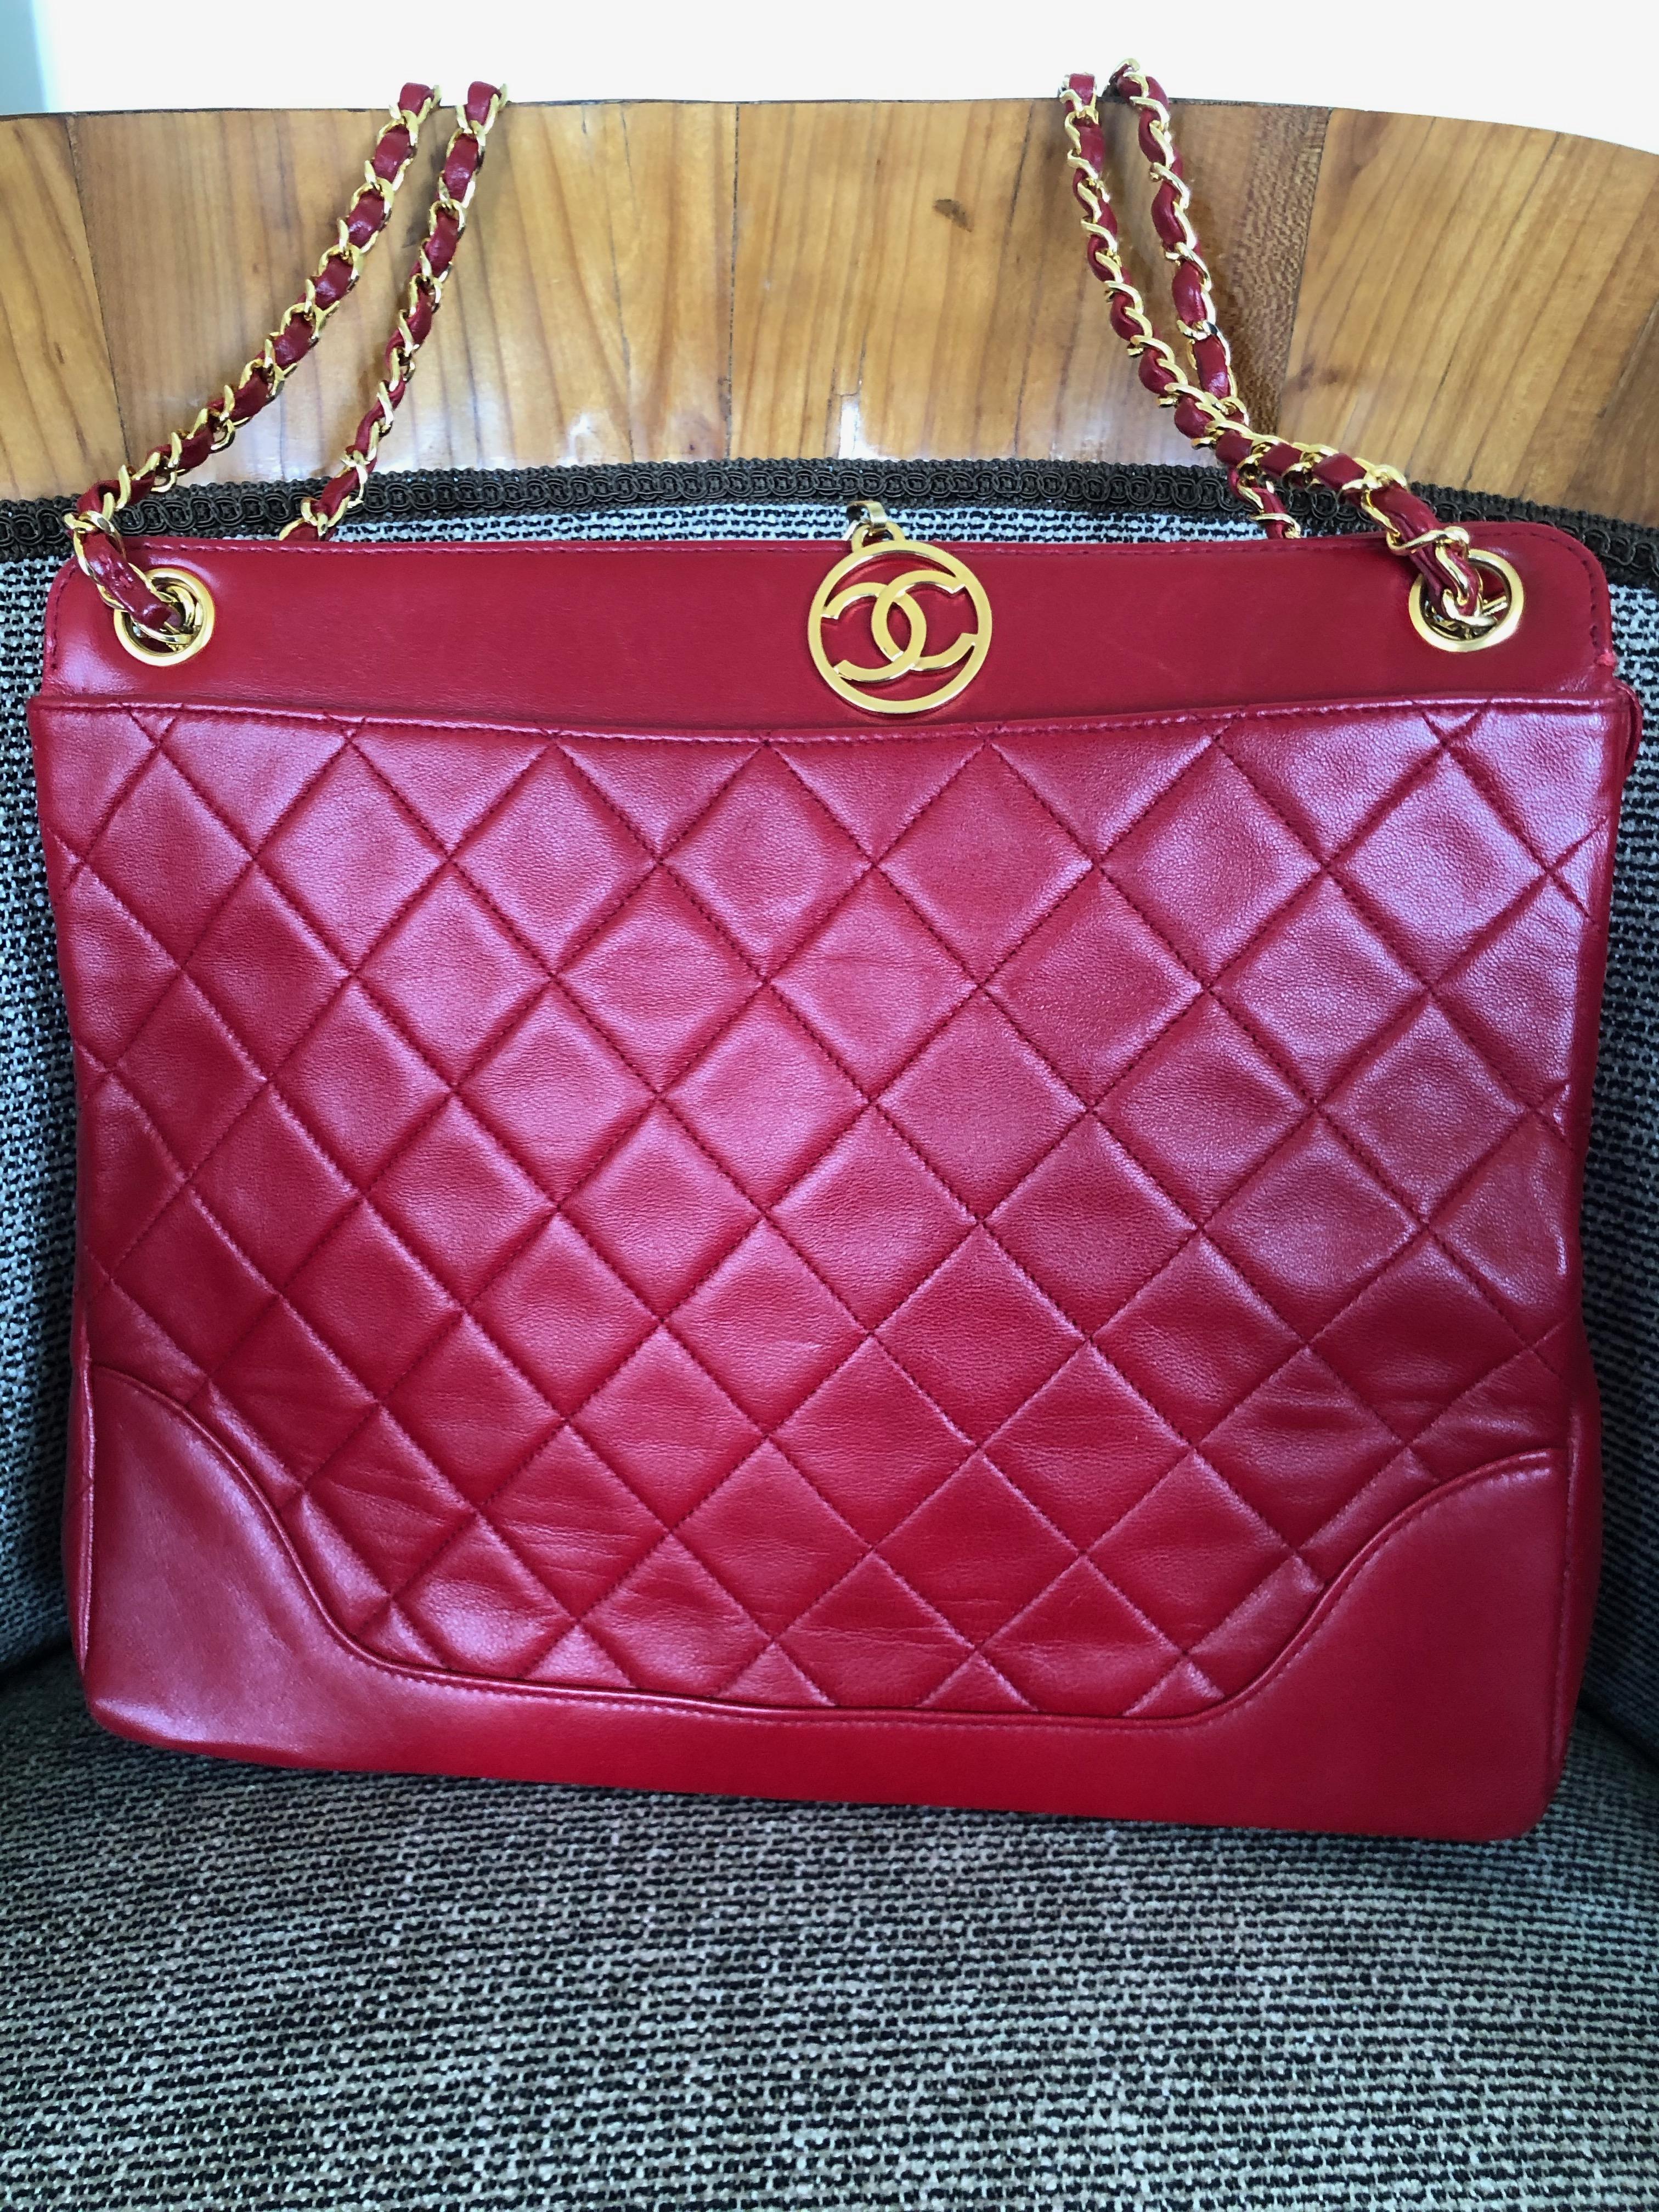 Chanel Tomato Red Vintage Lambskin Leather Quilted Tote Bag with Gold Hardware For Sale 1